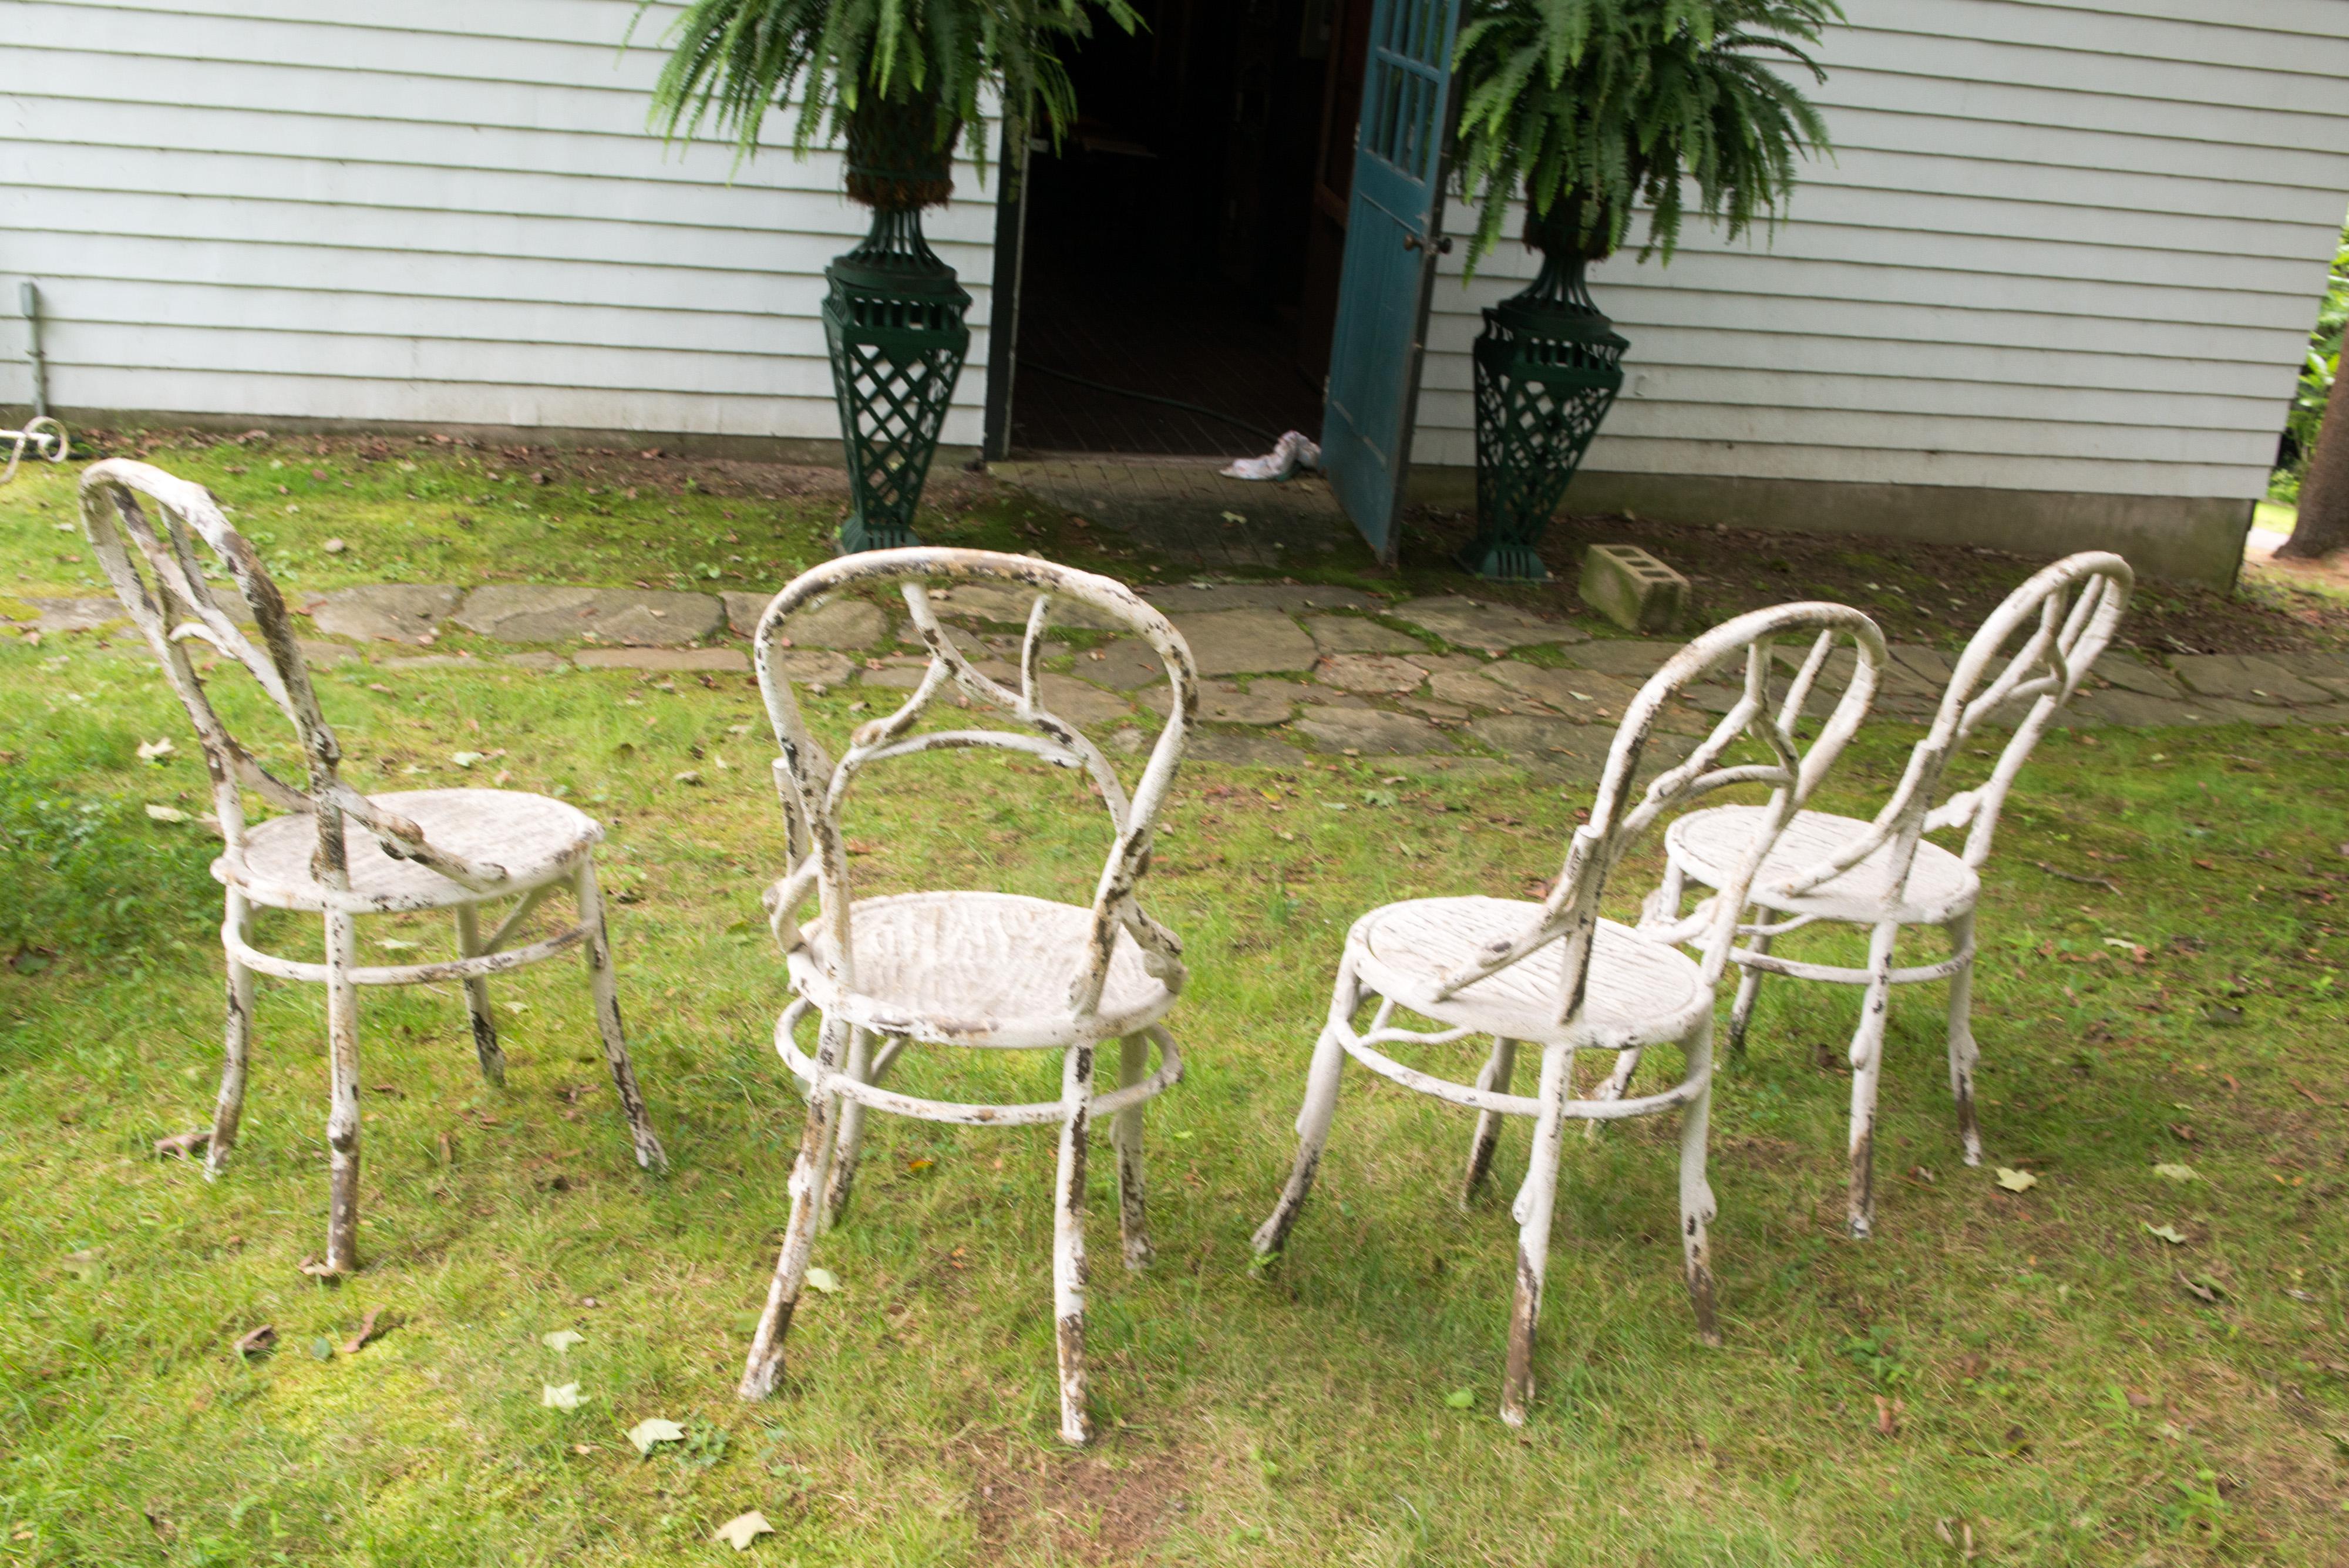 Lovely patina on this set of faux bois finish metal garden chairs. Deliberate distressed finish.